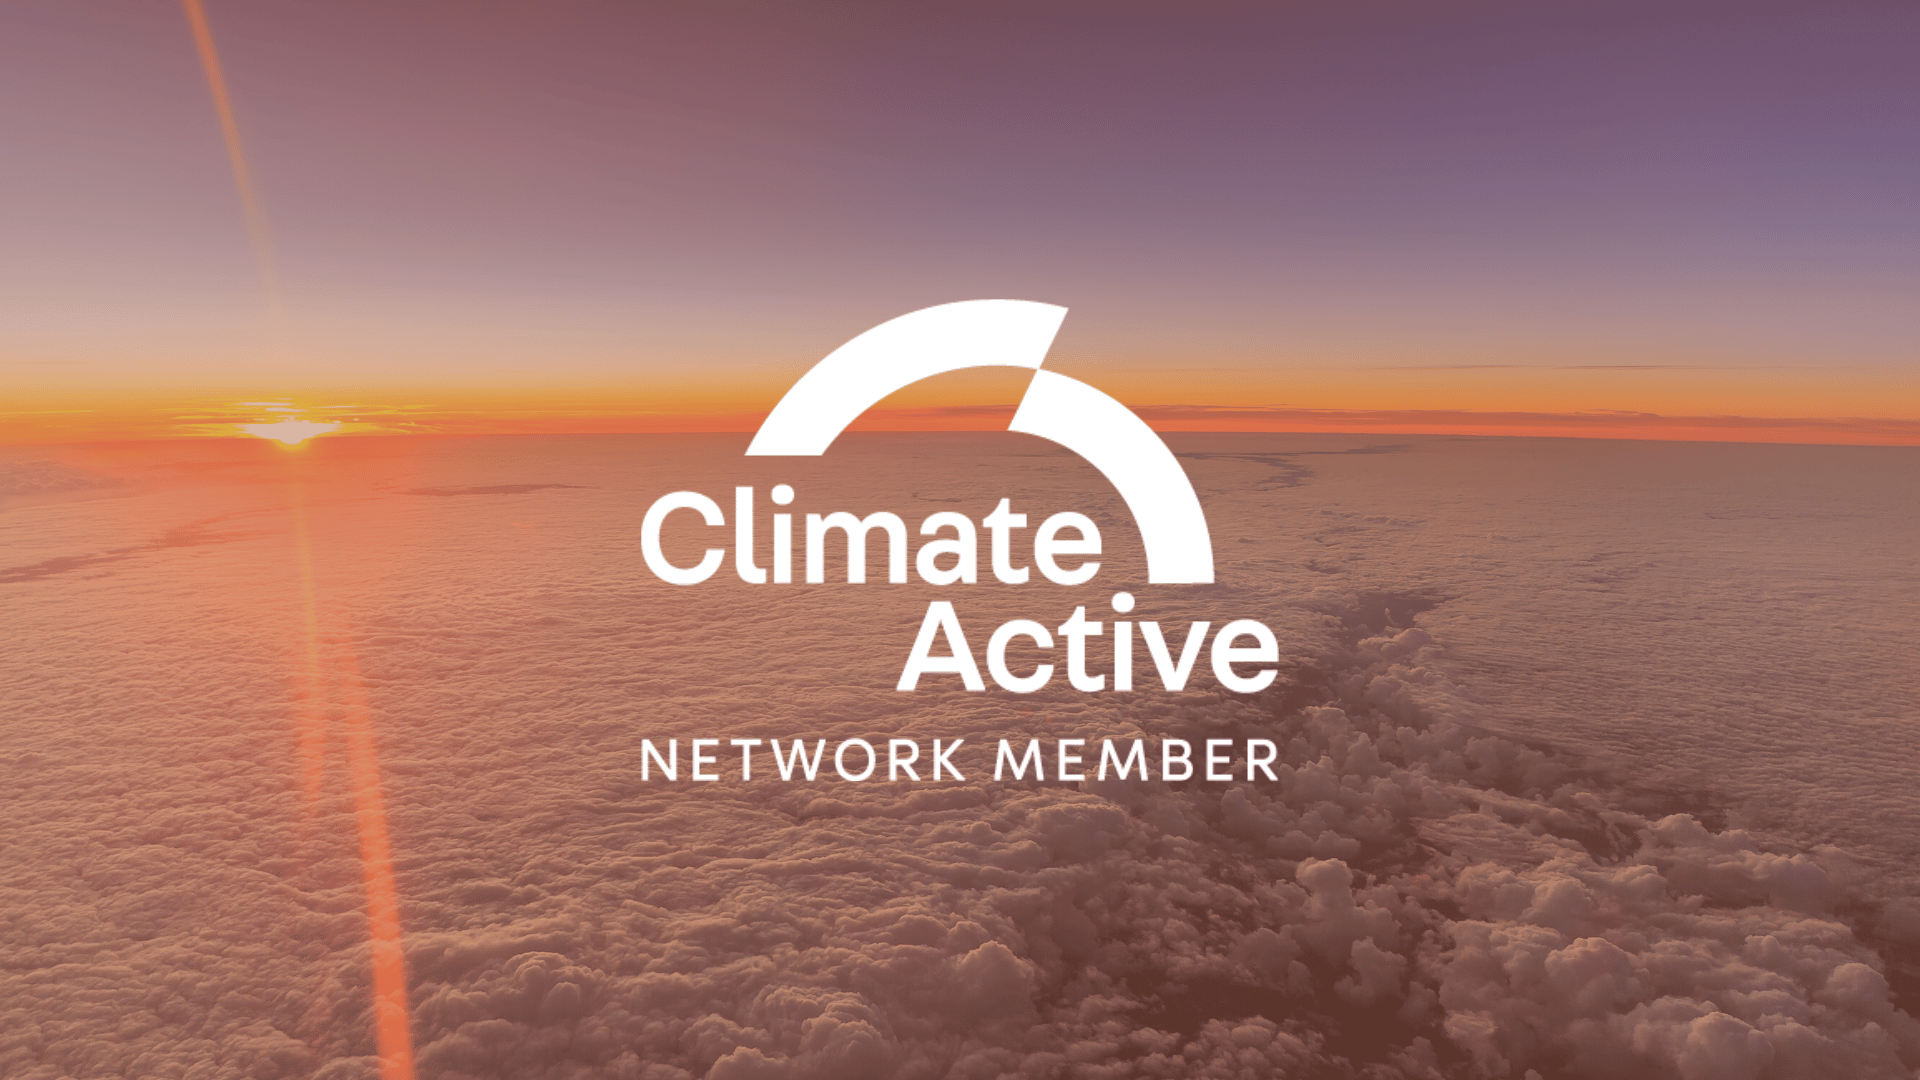 Climate Active Network Member